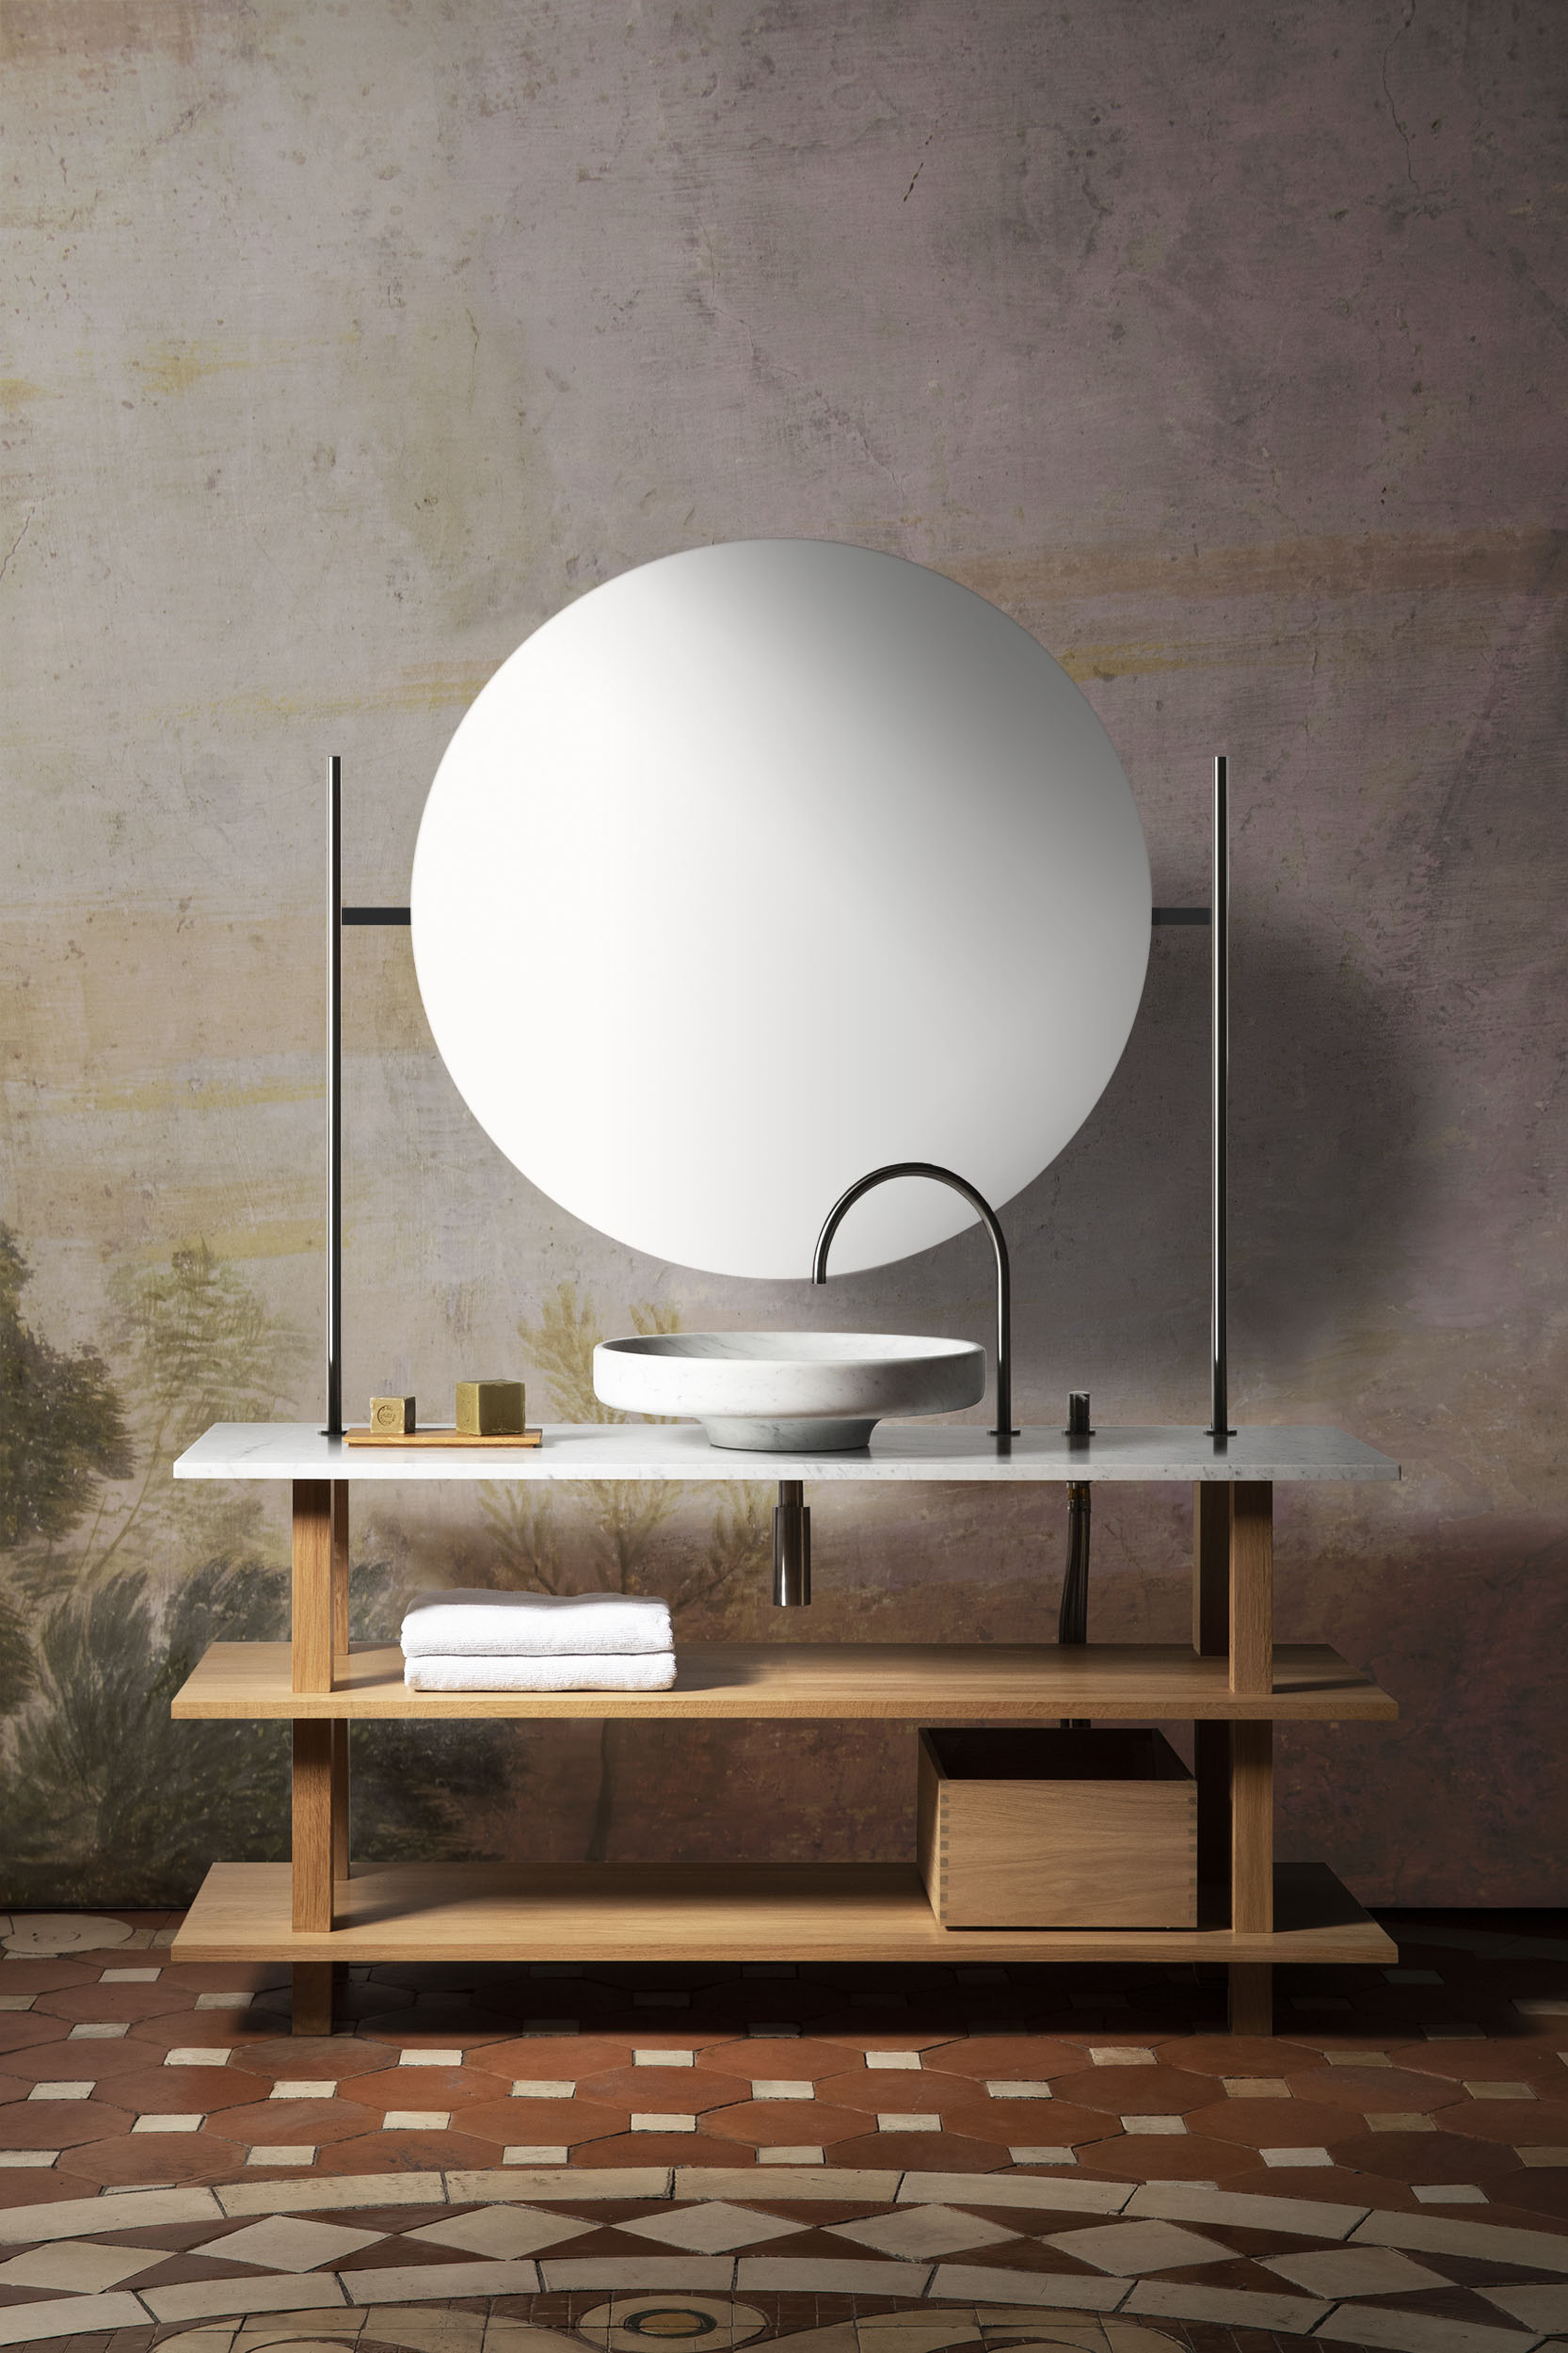 Open basin furniture in solid oak oiled for the bathroom with large round washbasin in white Carrara marble, solid stainless steel fittings and illuminating gantry with very large round mirror